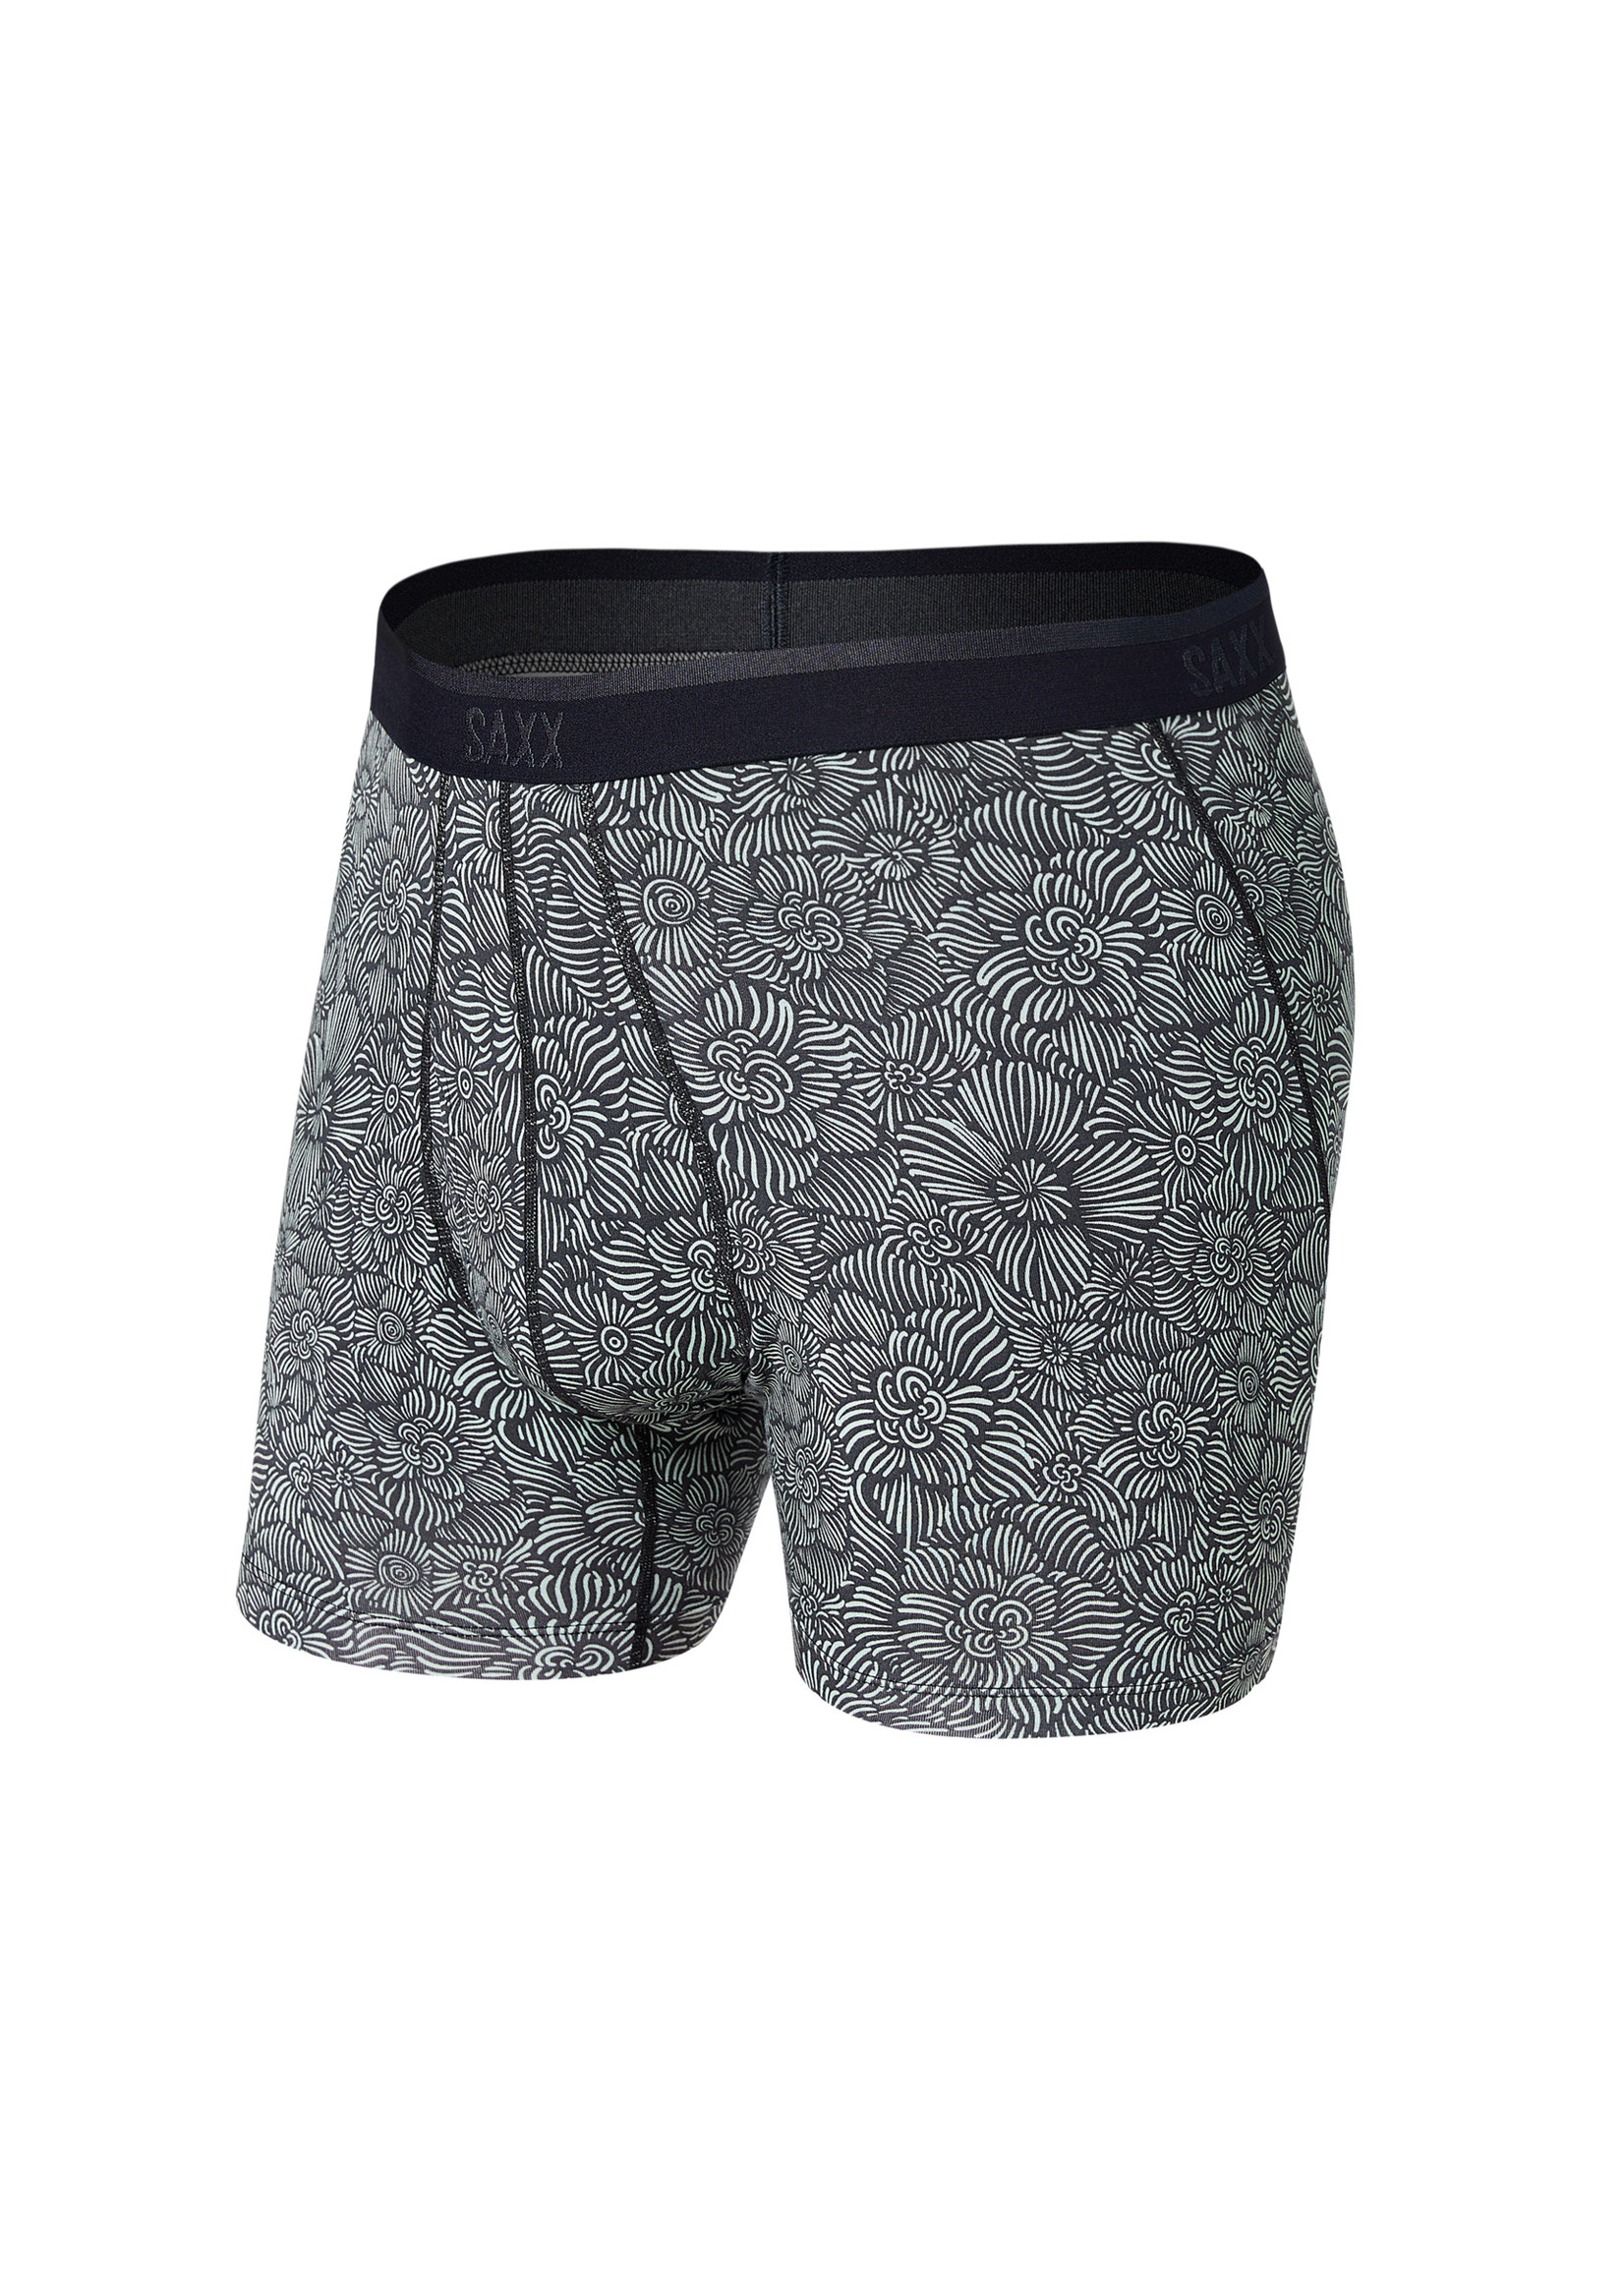 Saxx Platinum Boxer Brief with Fly